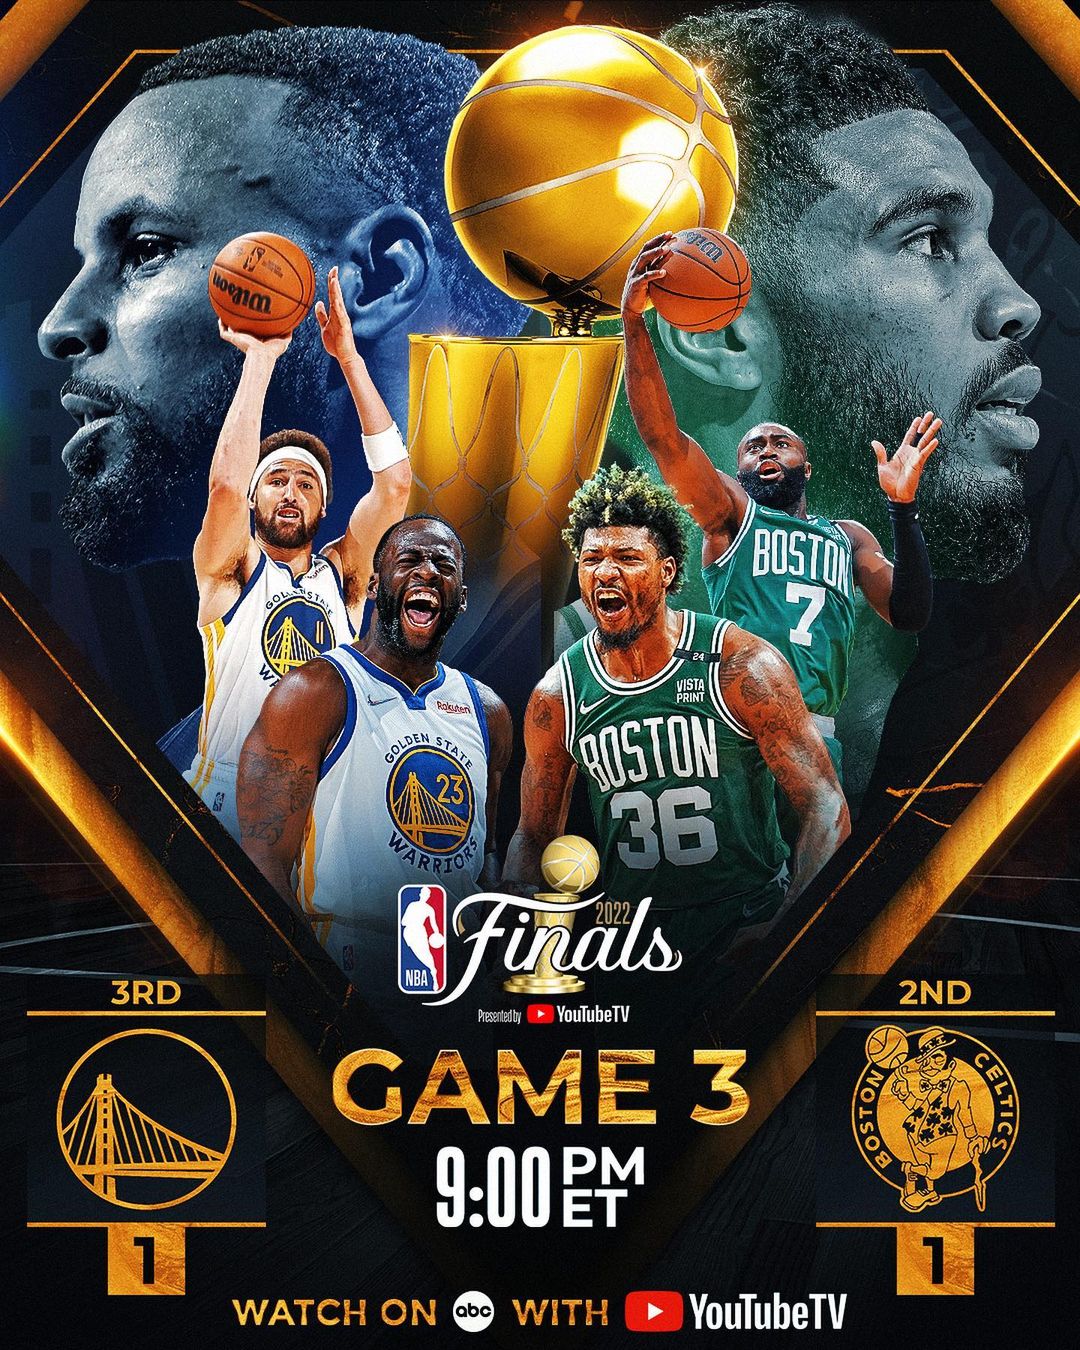 Will the @warriors or @celtics take 2-1 series lead with a win tonight??  #NBAF...